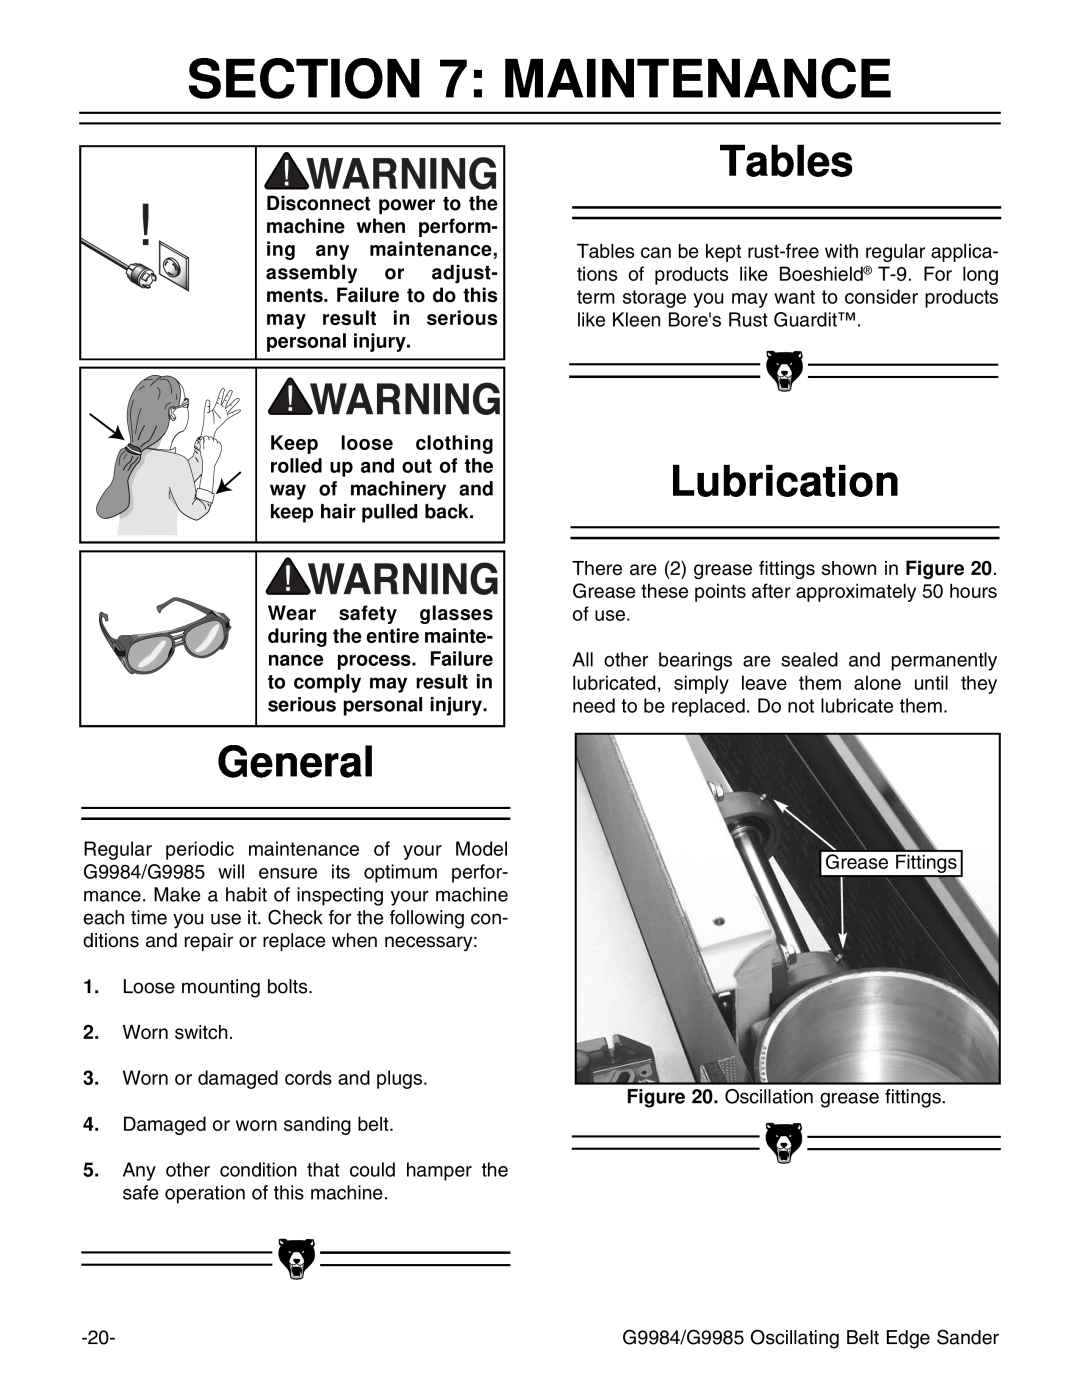 Grizzly G9984, G9985 instruction manual Maintenance, General, Tables, Lubrication 